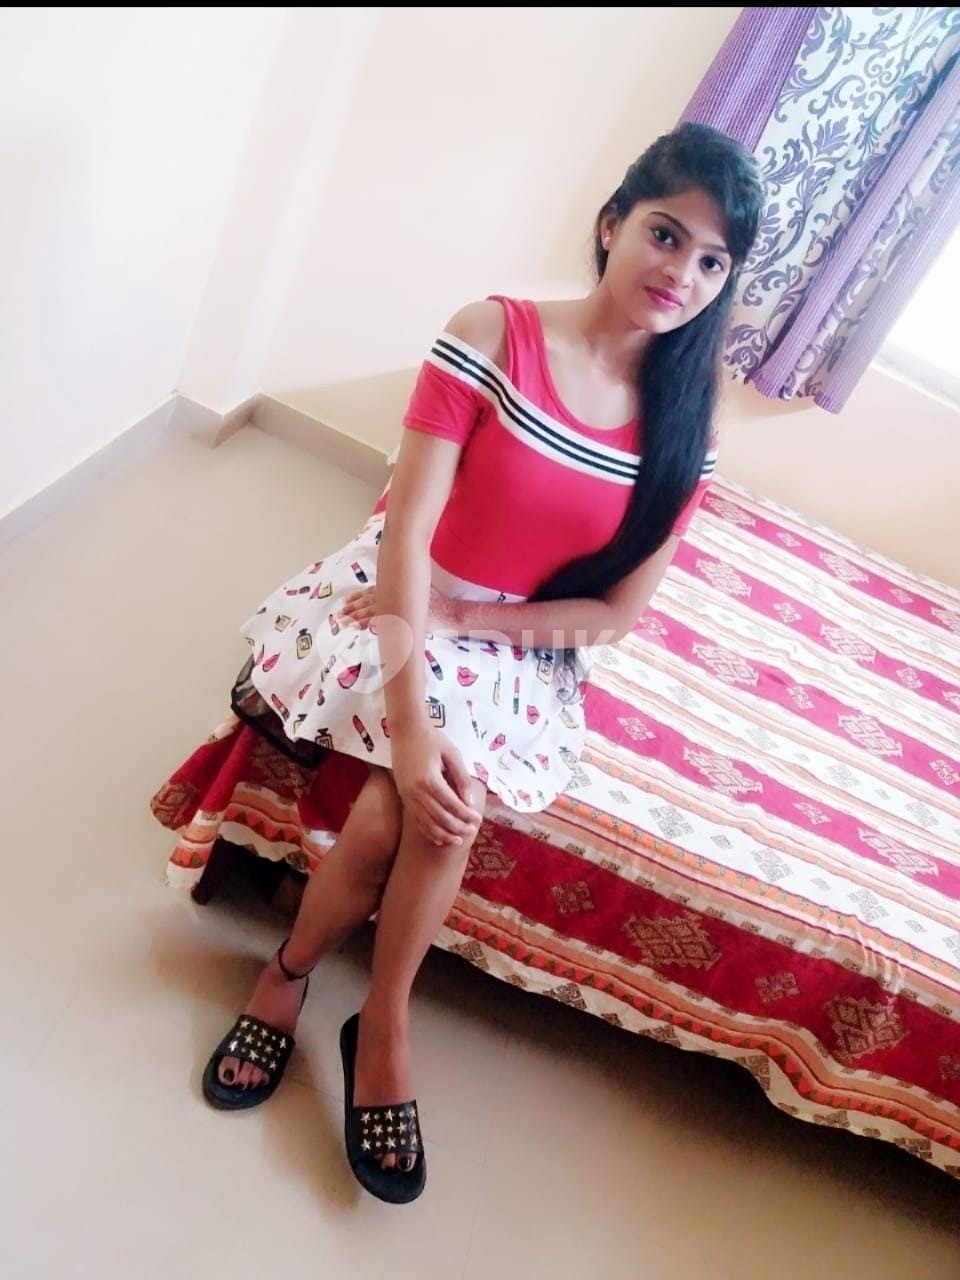 Myself vidya call girl in Srikakulam low cost independent doorstep housewife college girls full safe and secure sarvice 